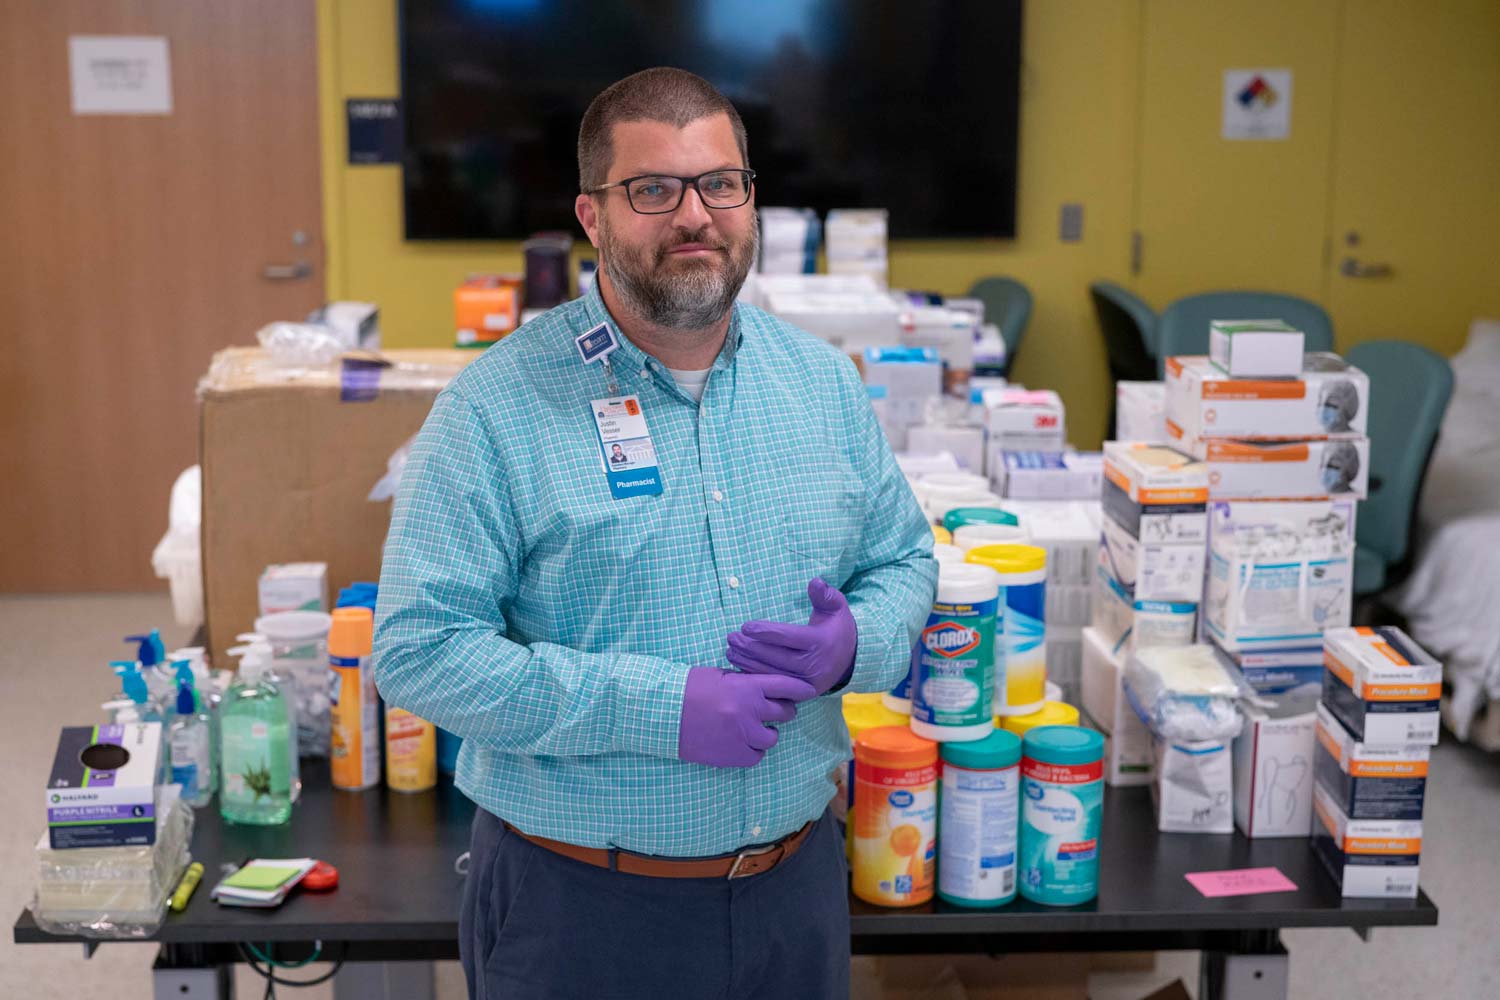 Man standing in front of a table with PPE and clorox wipes